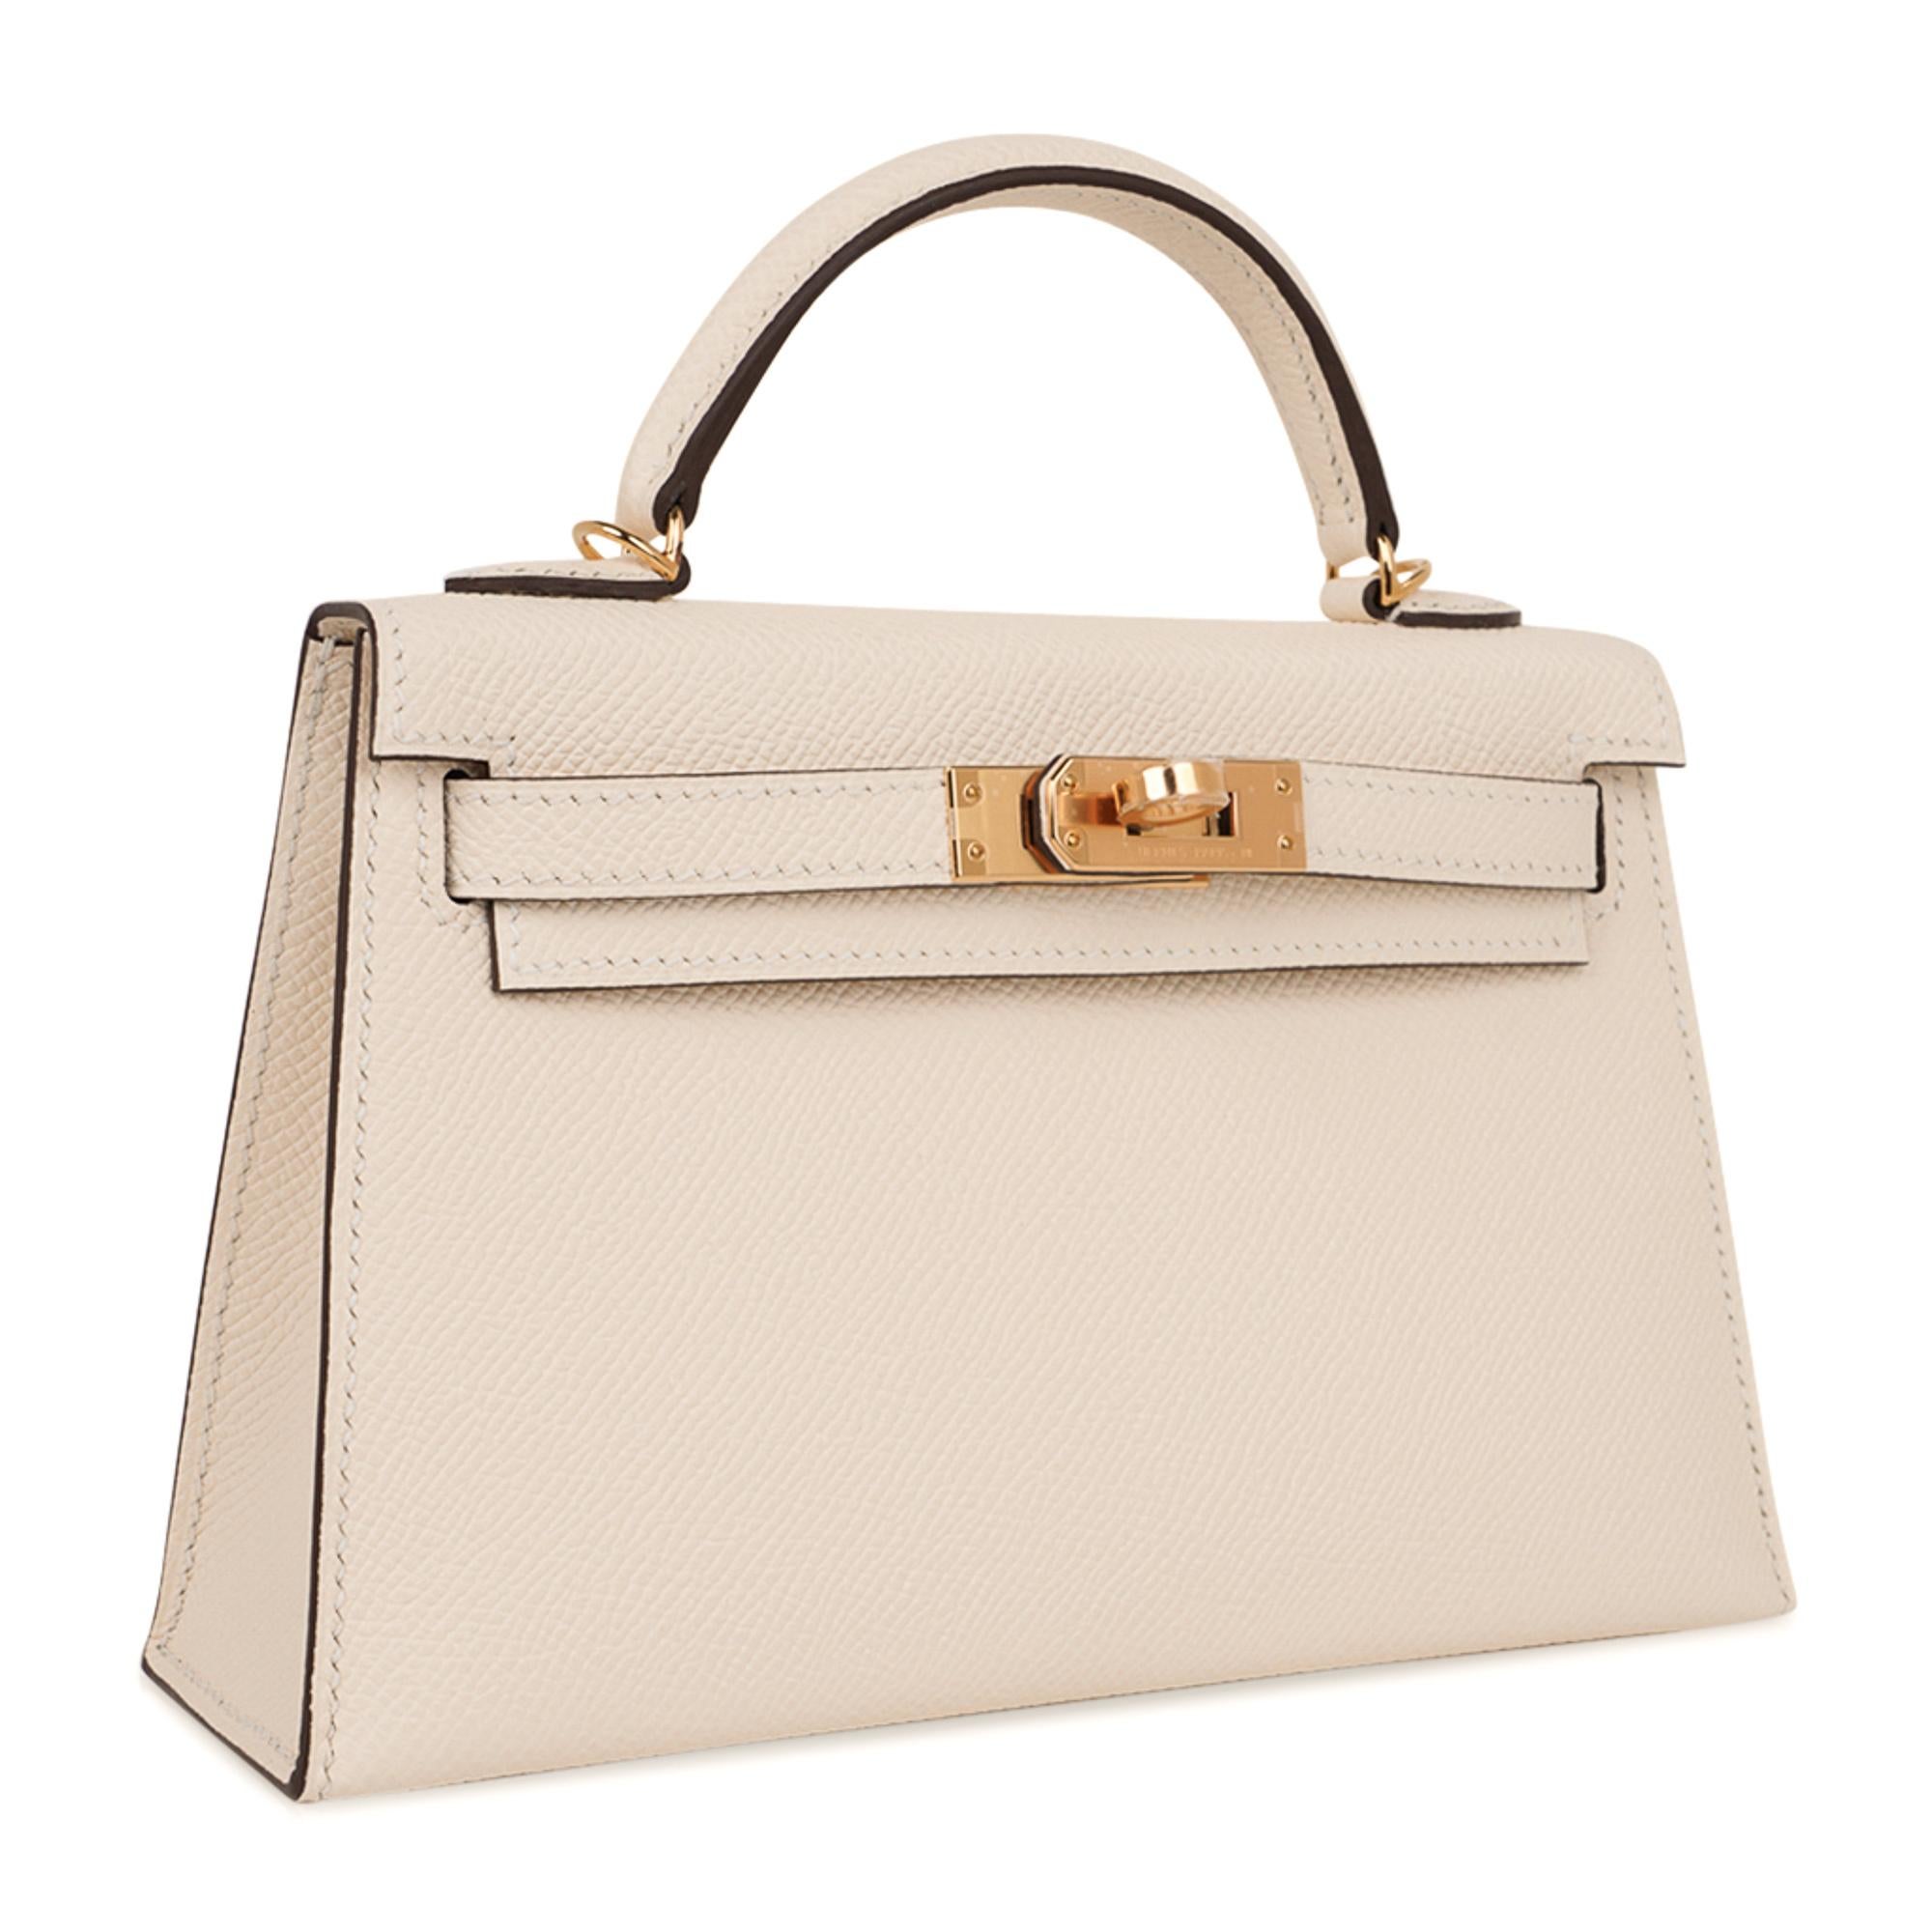 Mightychic offers an Hermes Kelly 20 Sellier Mini bag featured in neutral Nata.
Crisp Epsom leather with gold hardware.
Carry by hand, shoulder or cross body.
Divine size for day to evening. 
Comes with signature Hermes box, shoulder strap, and